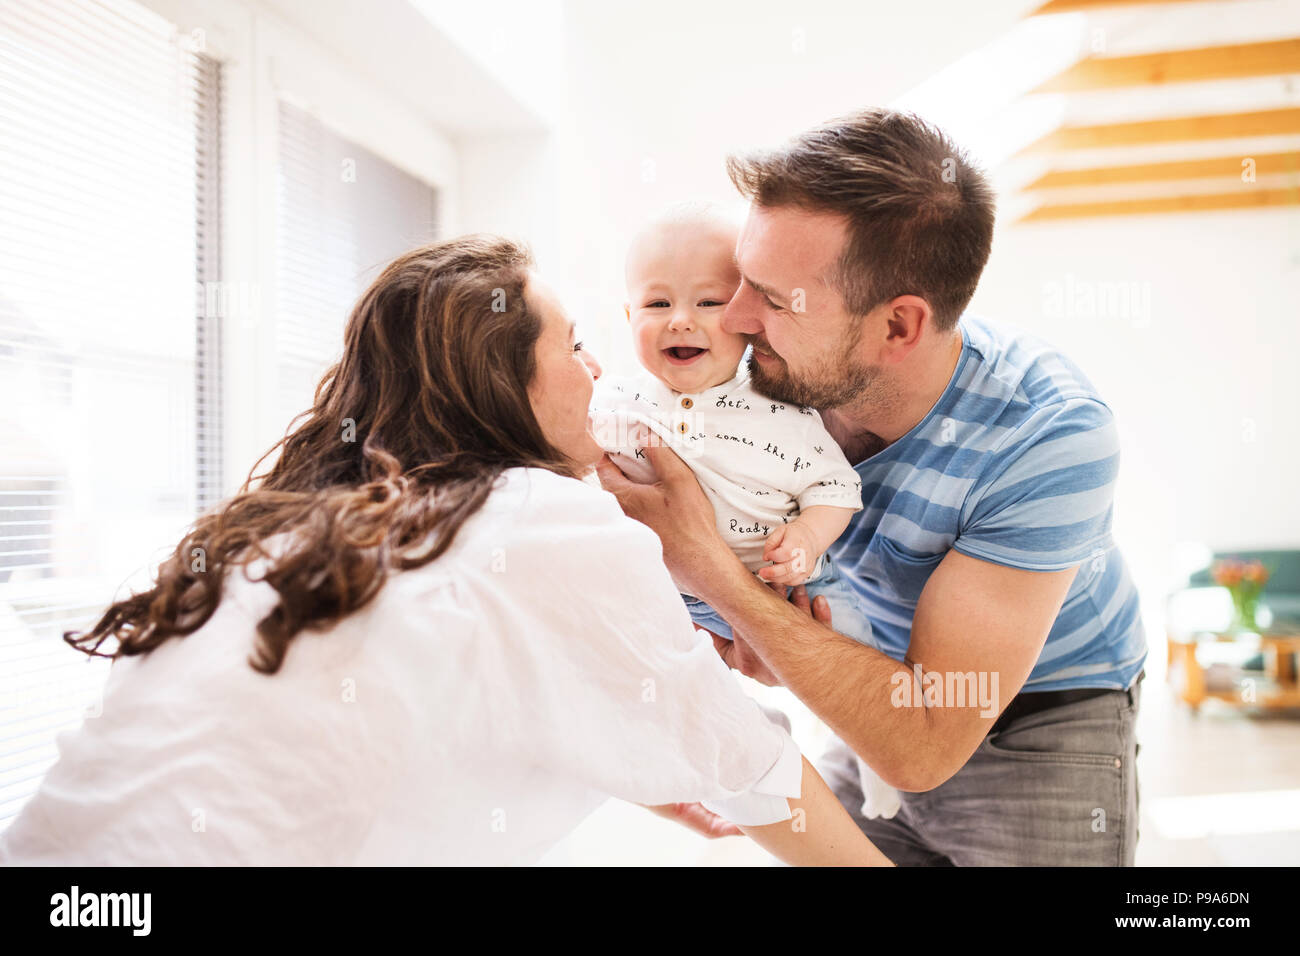 Young family with a baby boy at home, having fun. Stock Photo